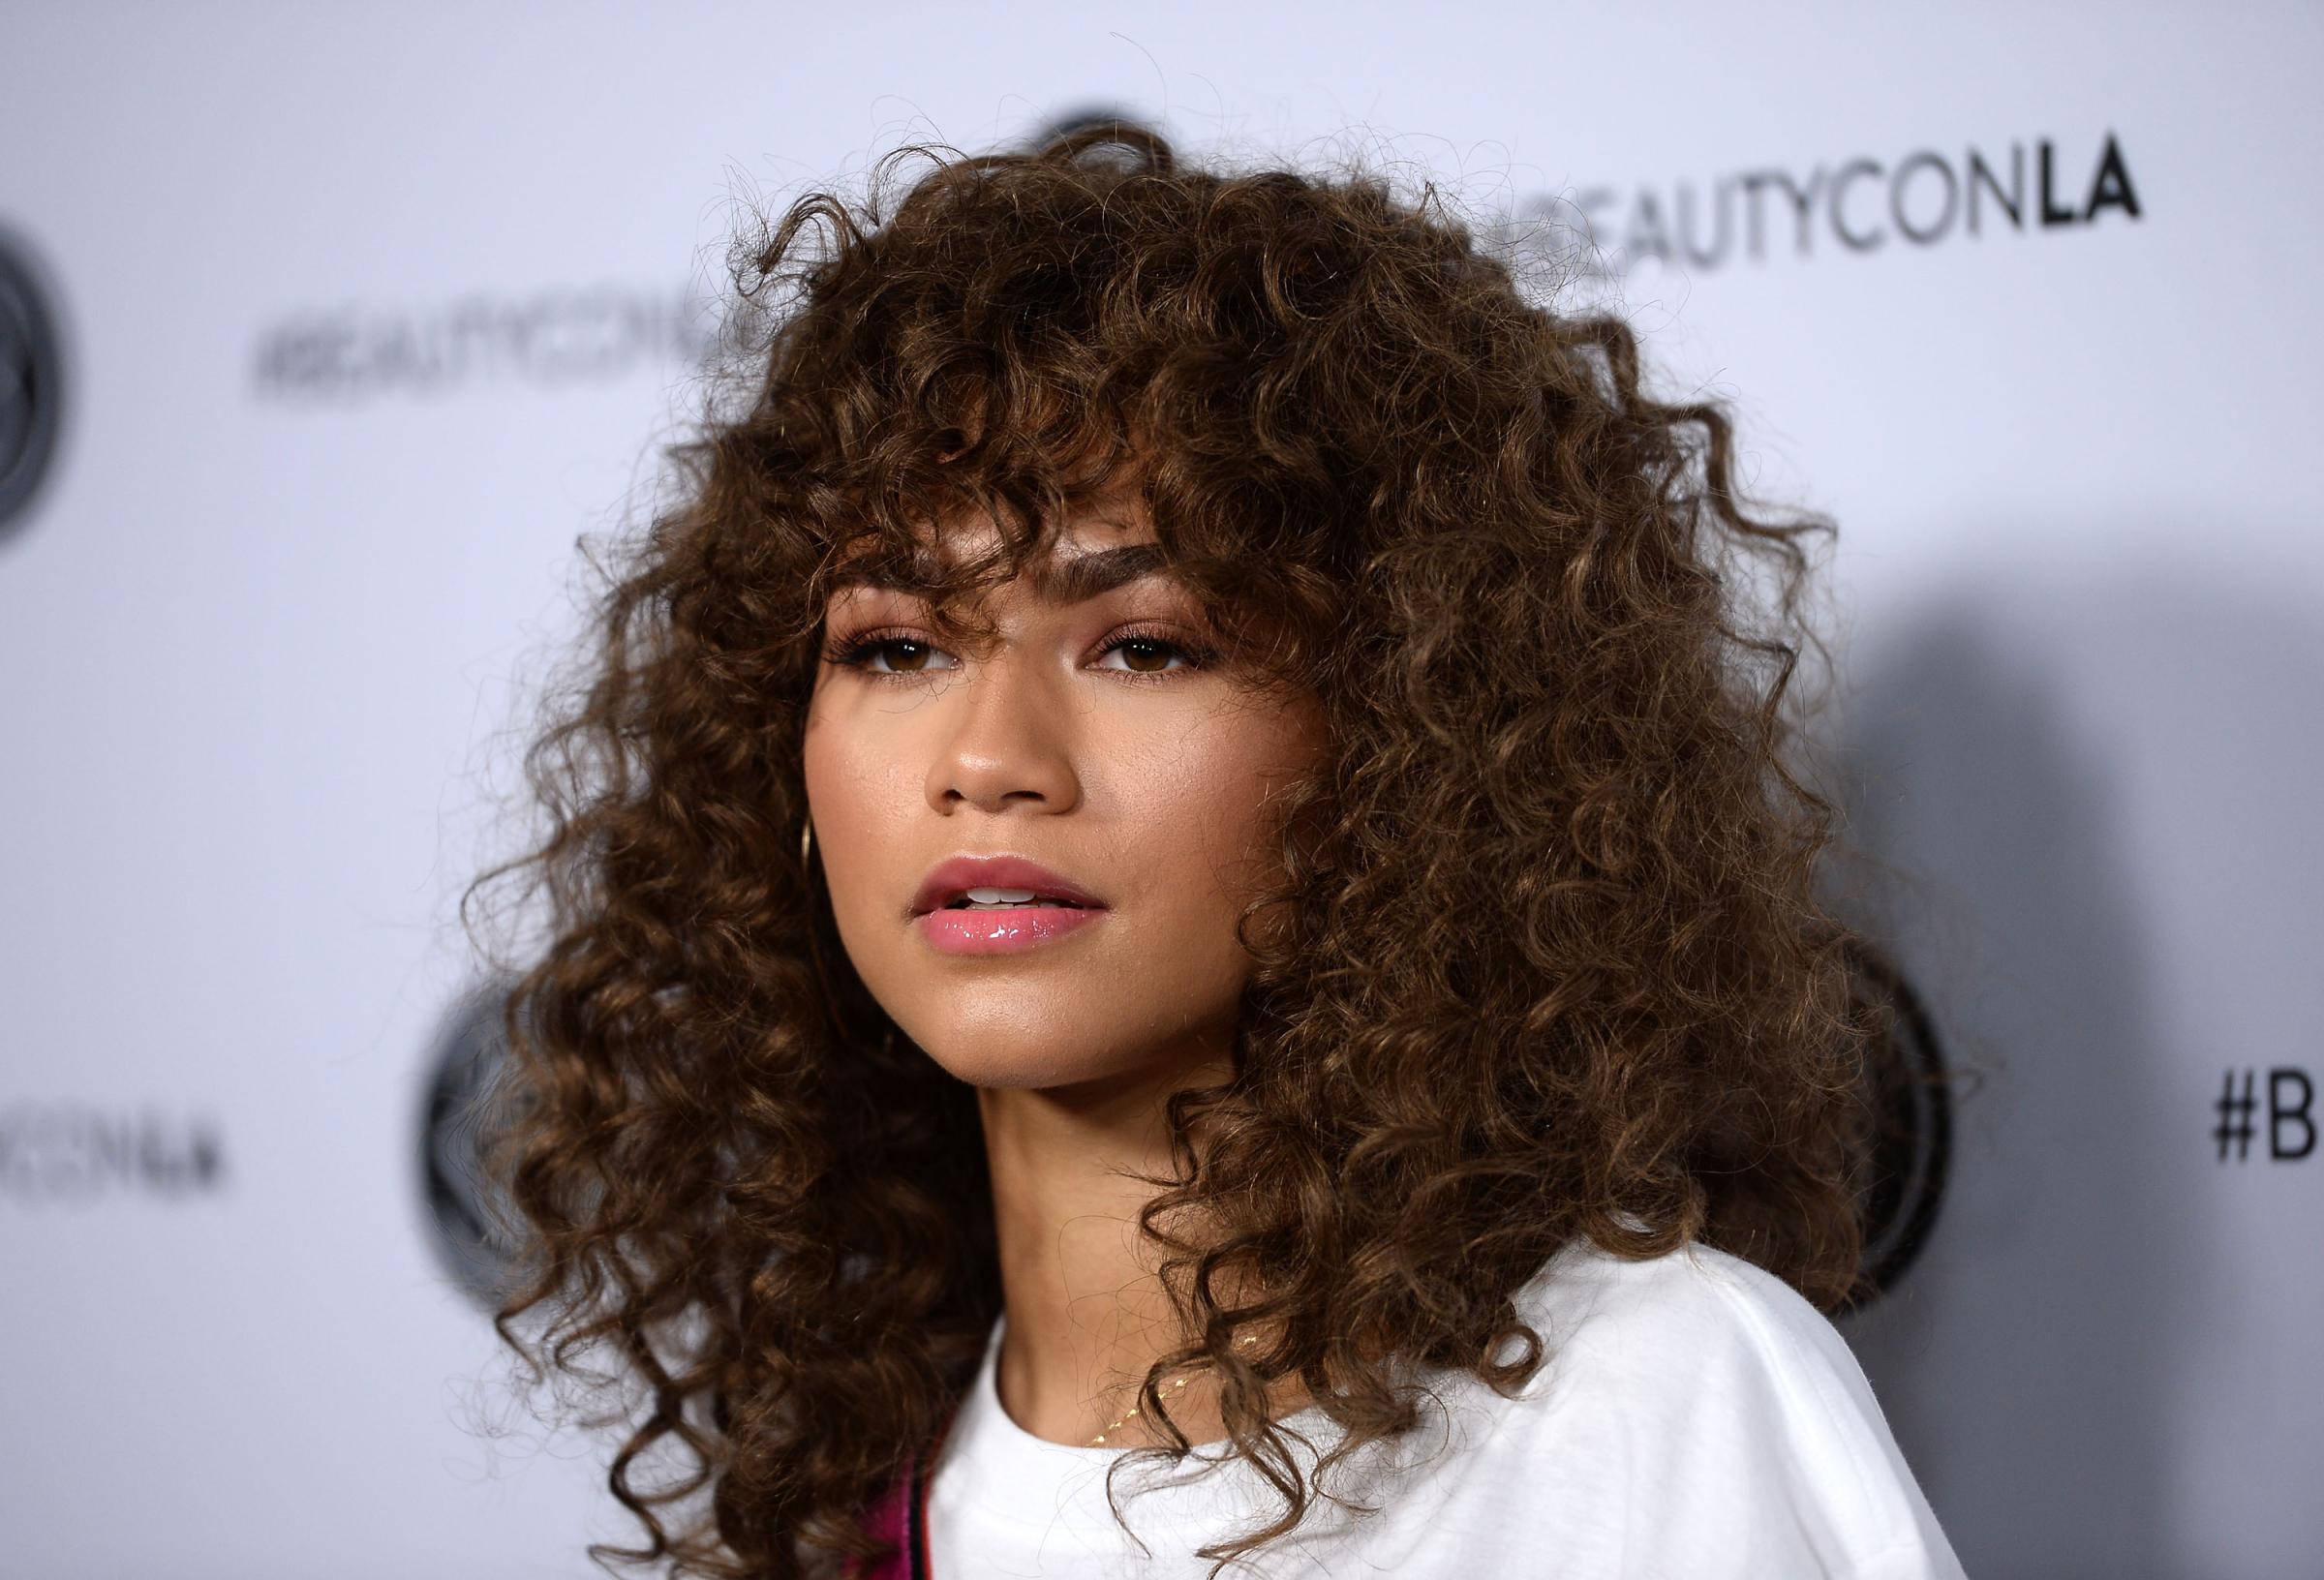 Zendaya attends the 5th Annual Beautycon Festival Los Angeles on August 12, 2017.